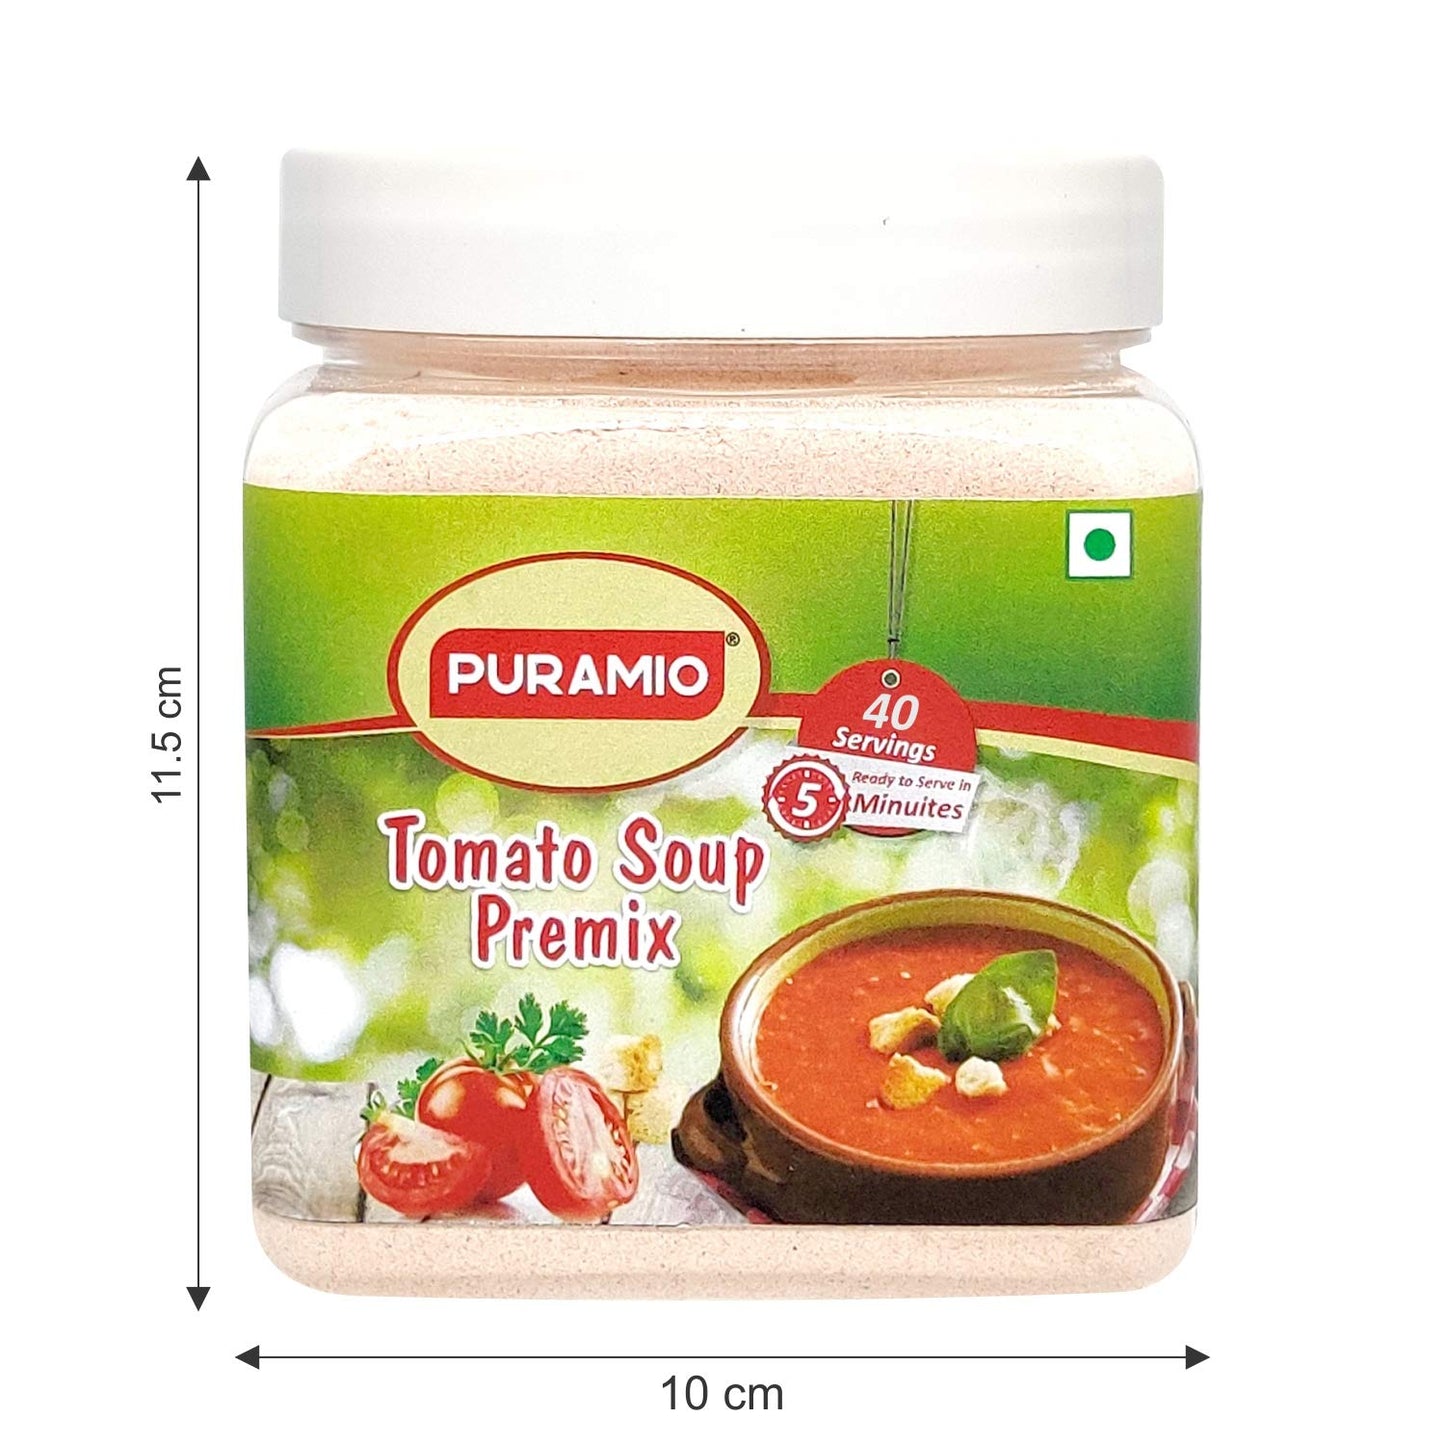 Puramio Soup Premix Combo Pack of 2 - Tomato and Hot & Sour, 400g Each